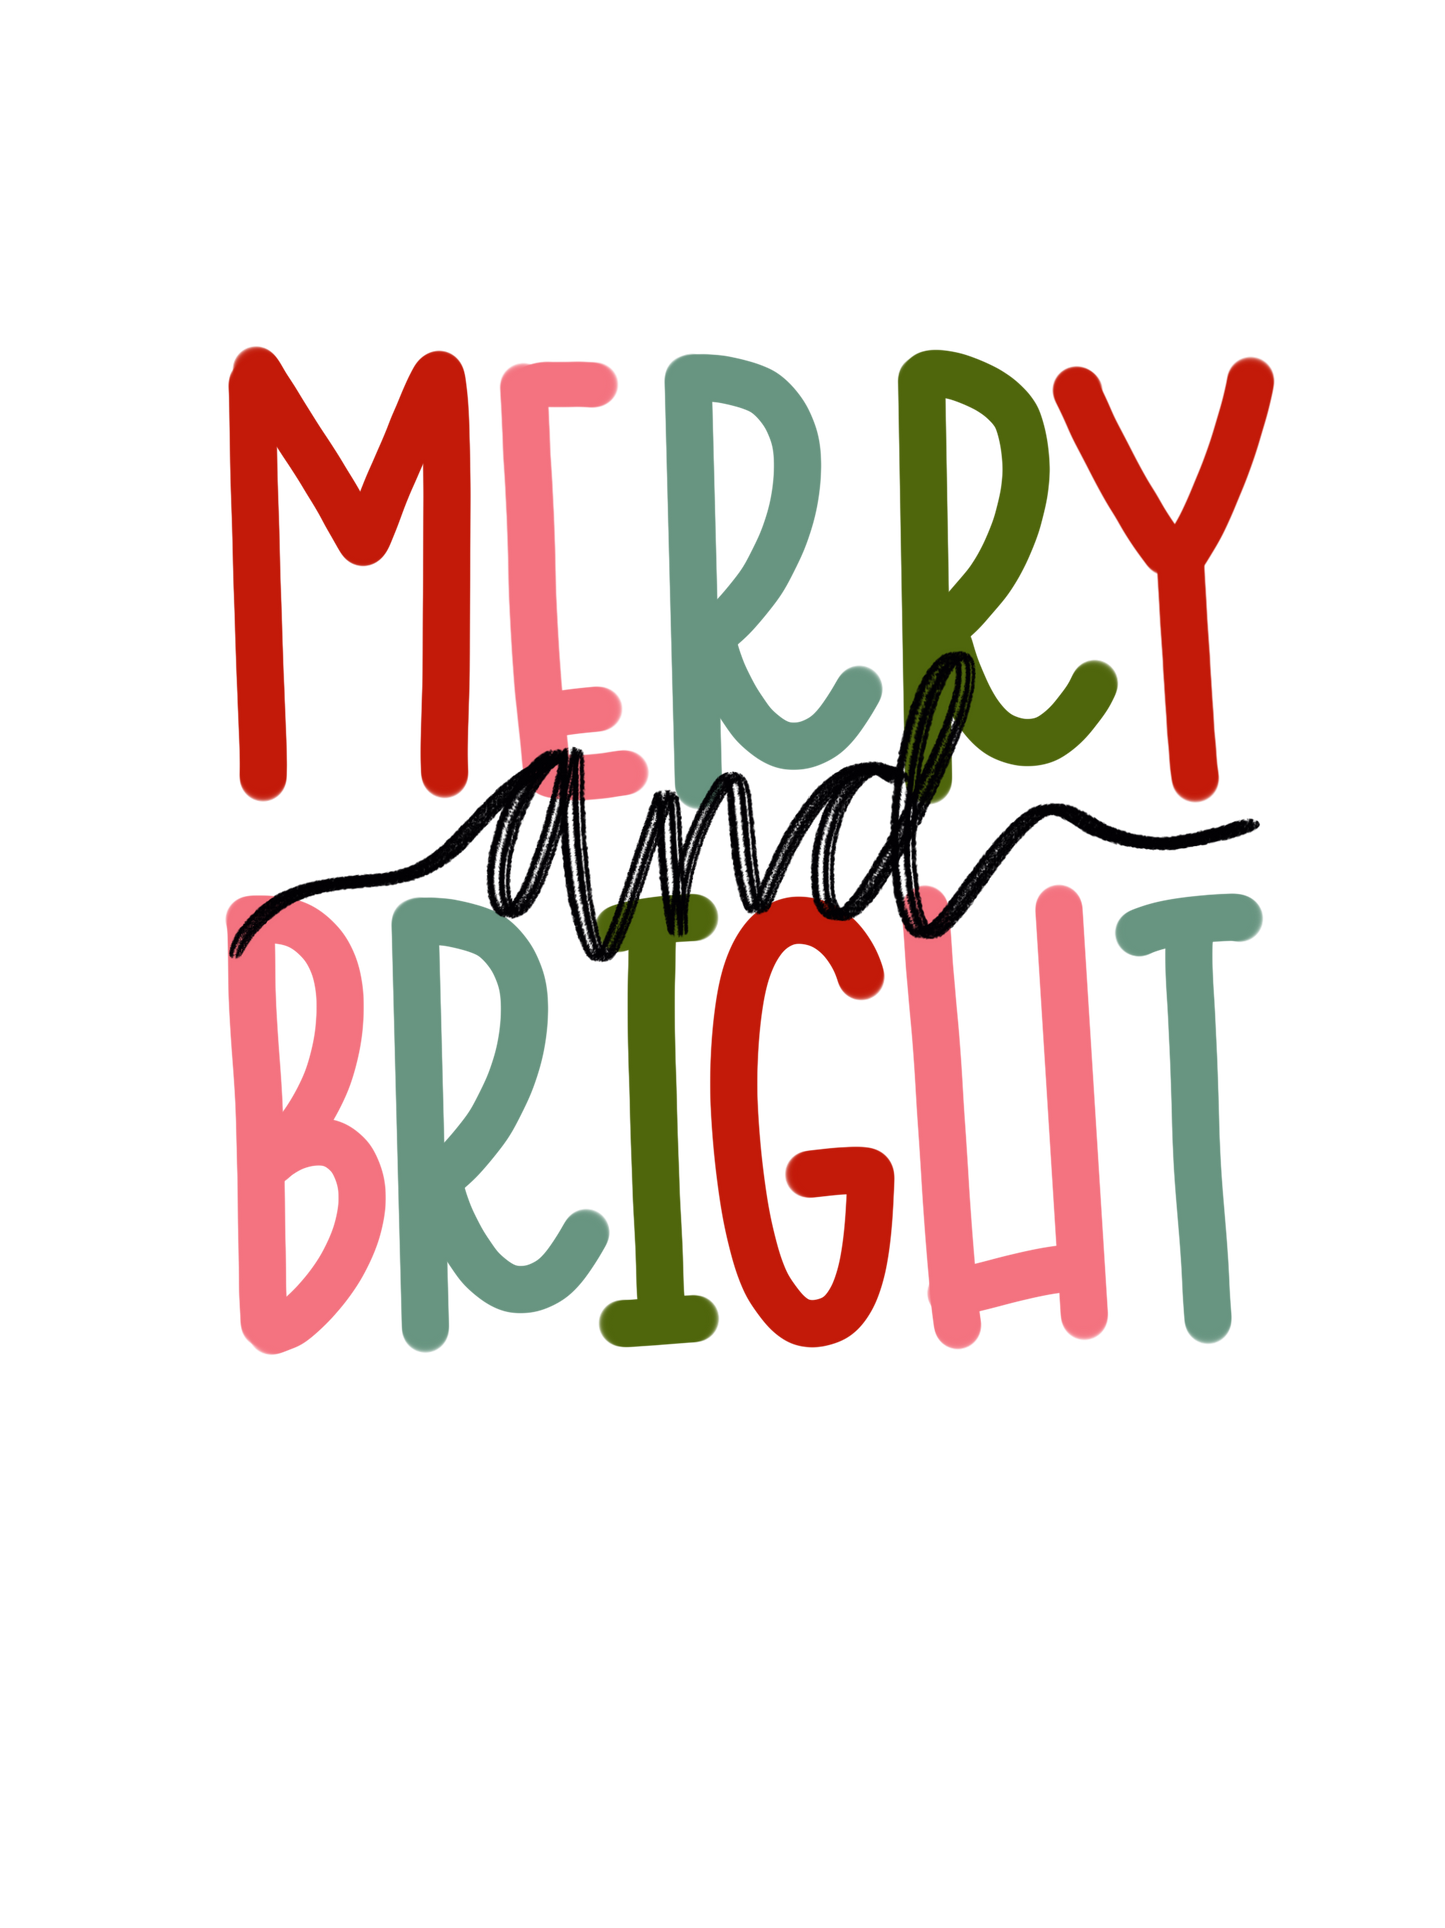 MERRY AND BRIGHT